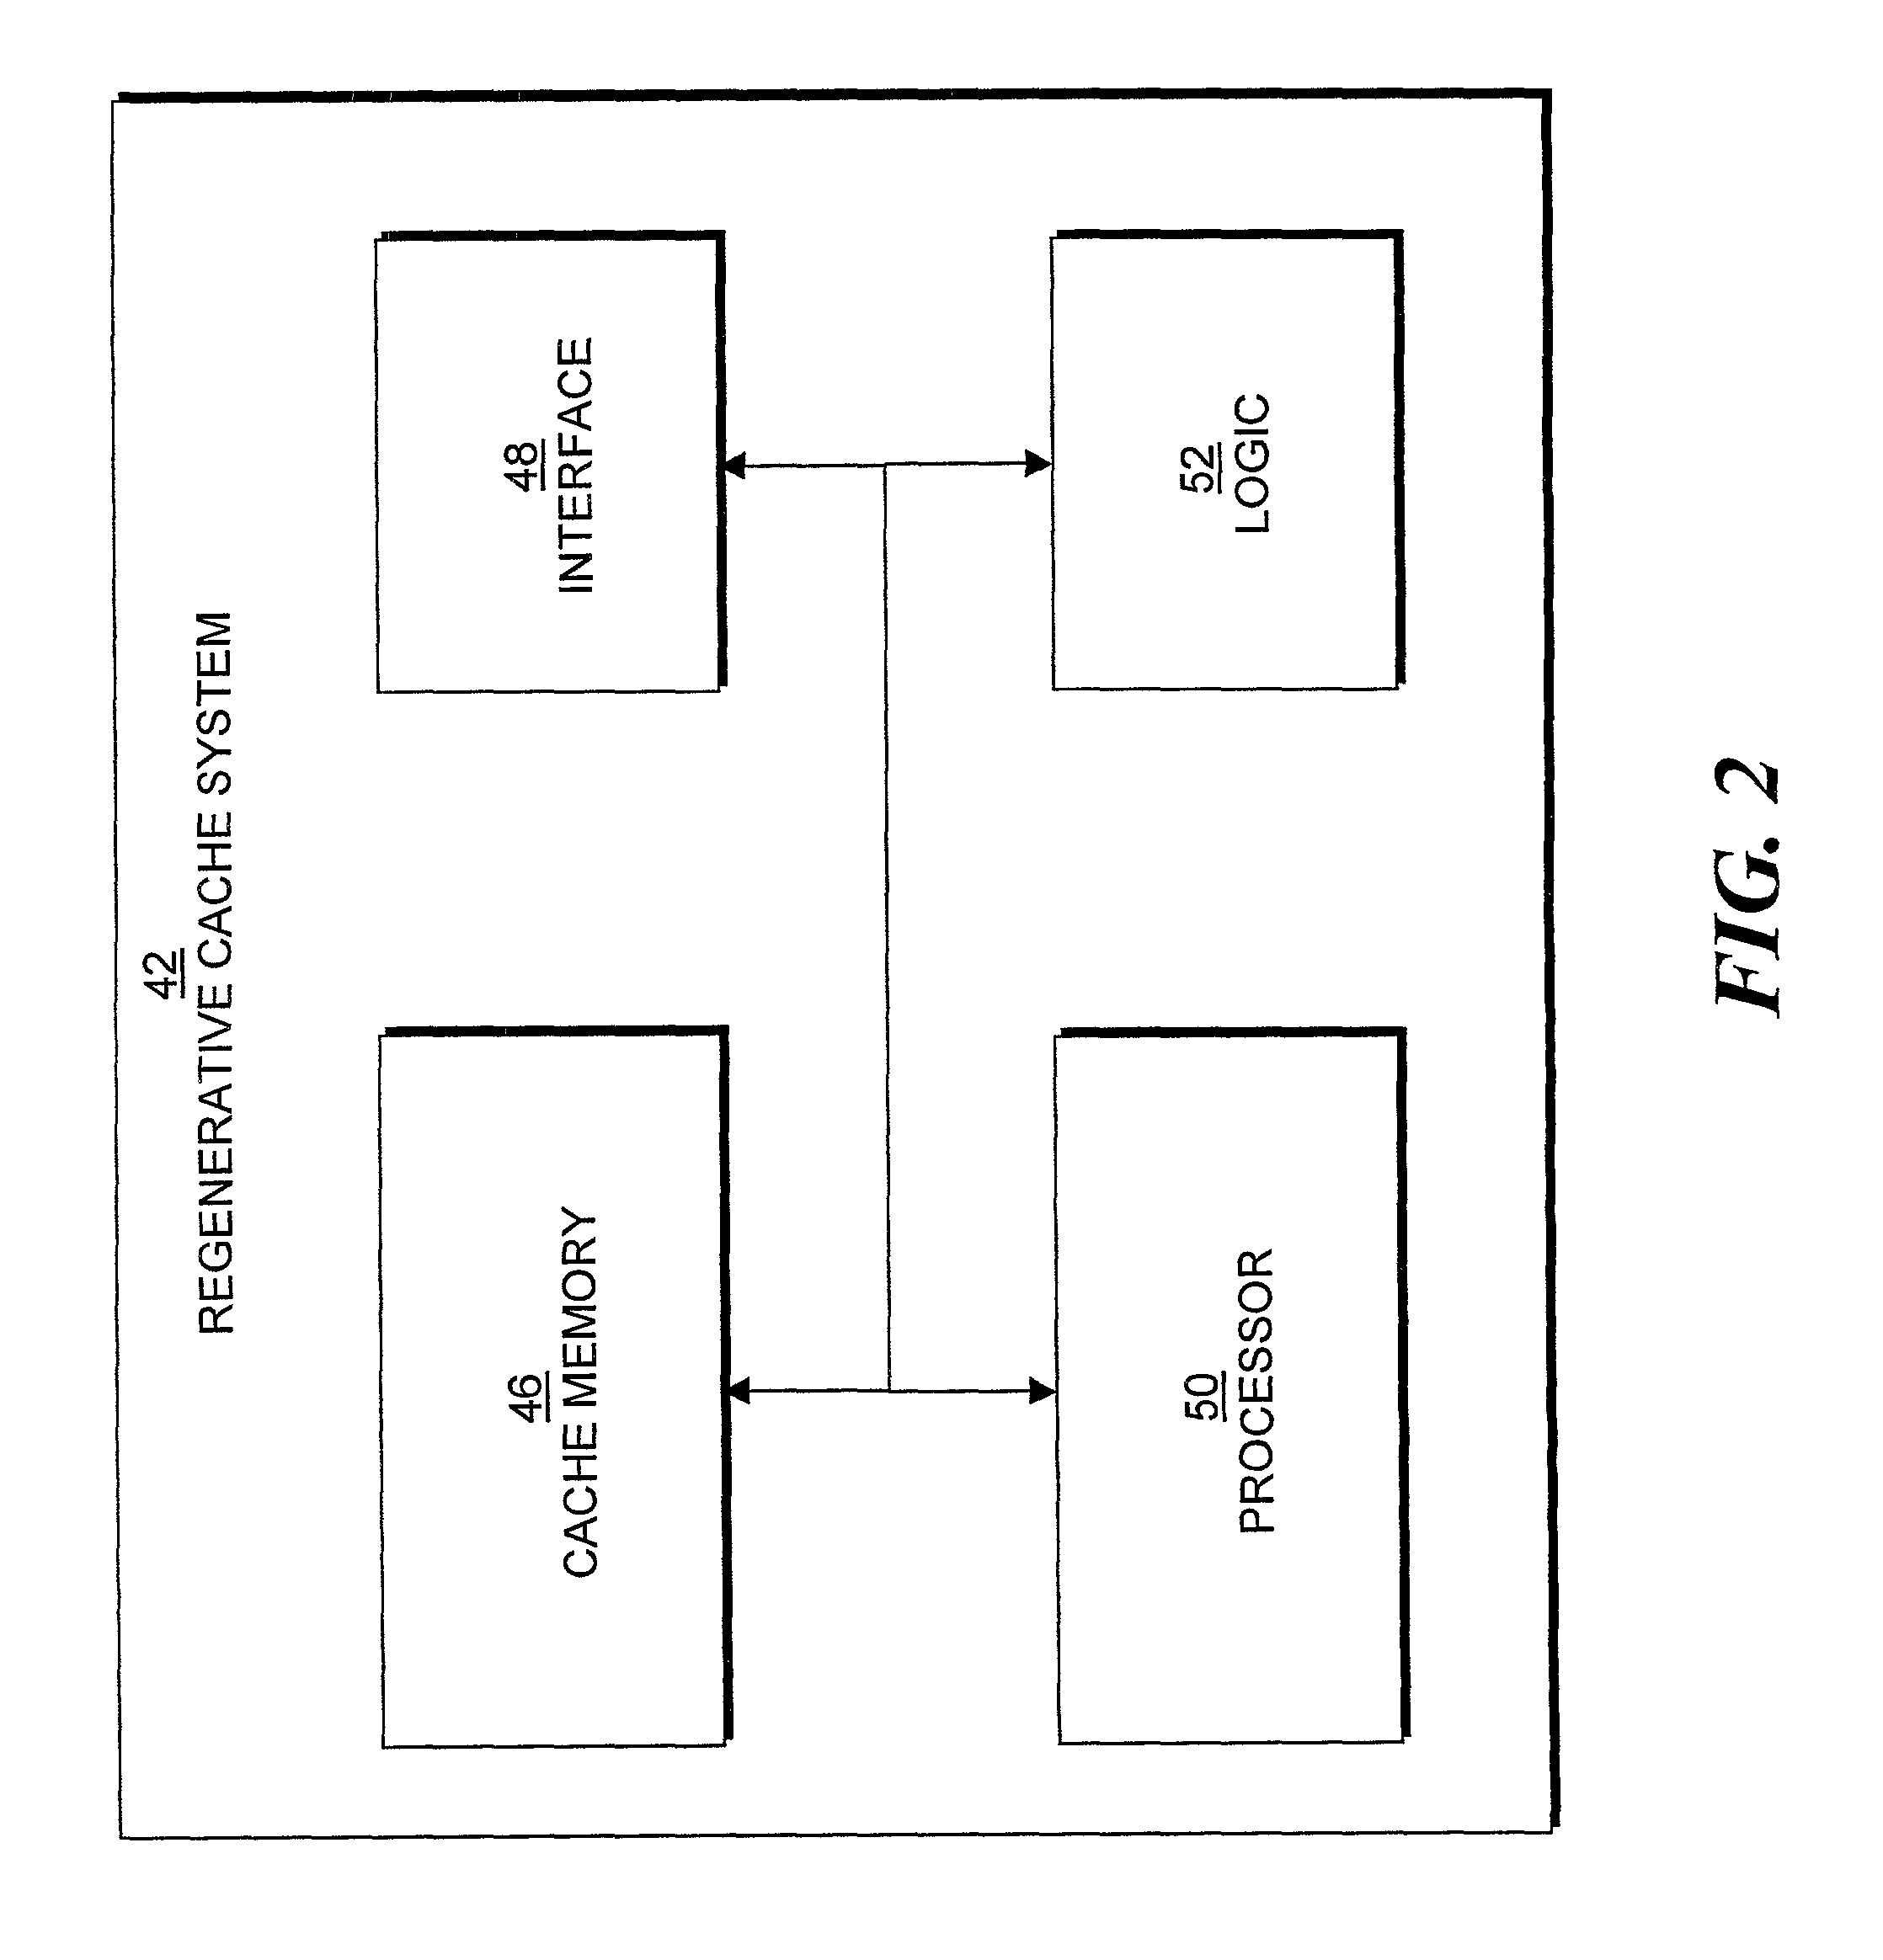 Cache system and method for generating uncached objects from cached and stored object components